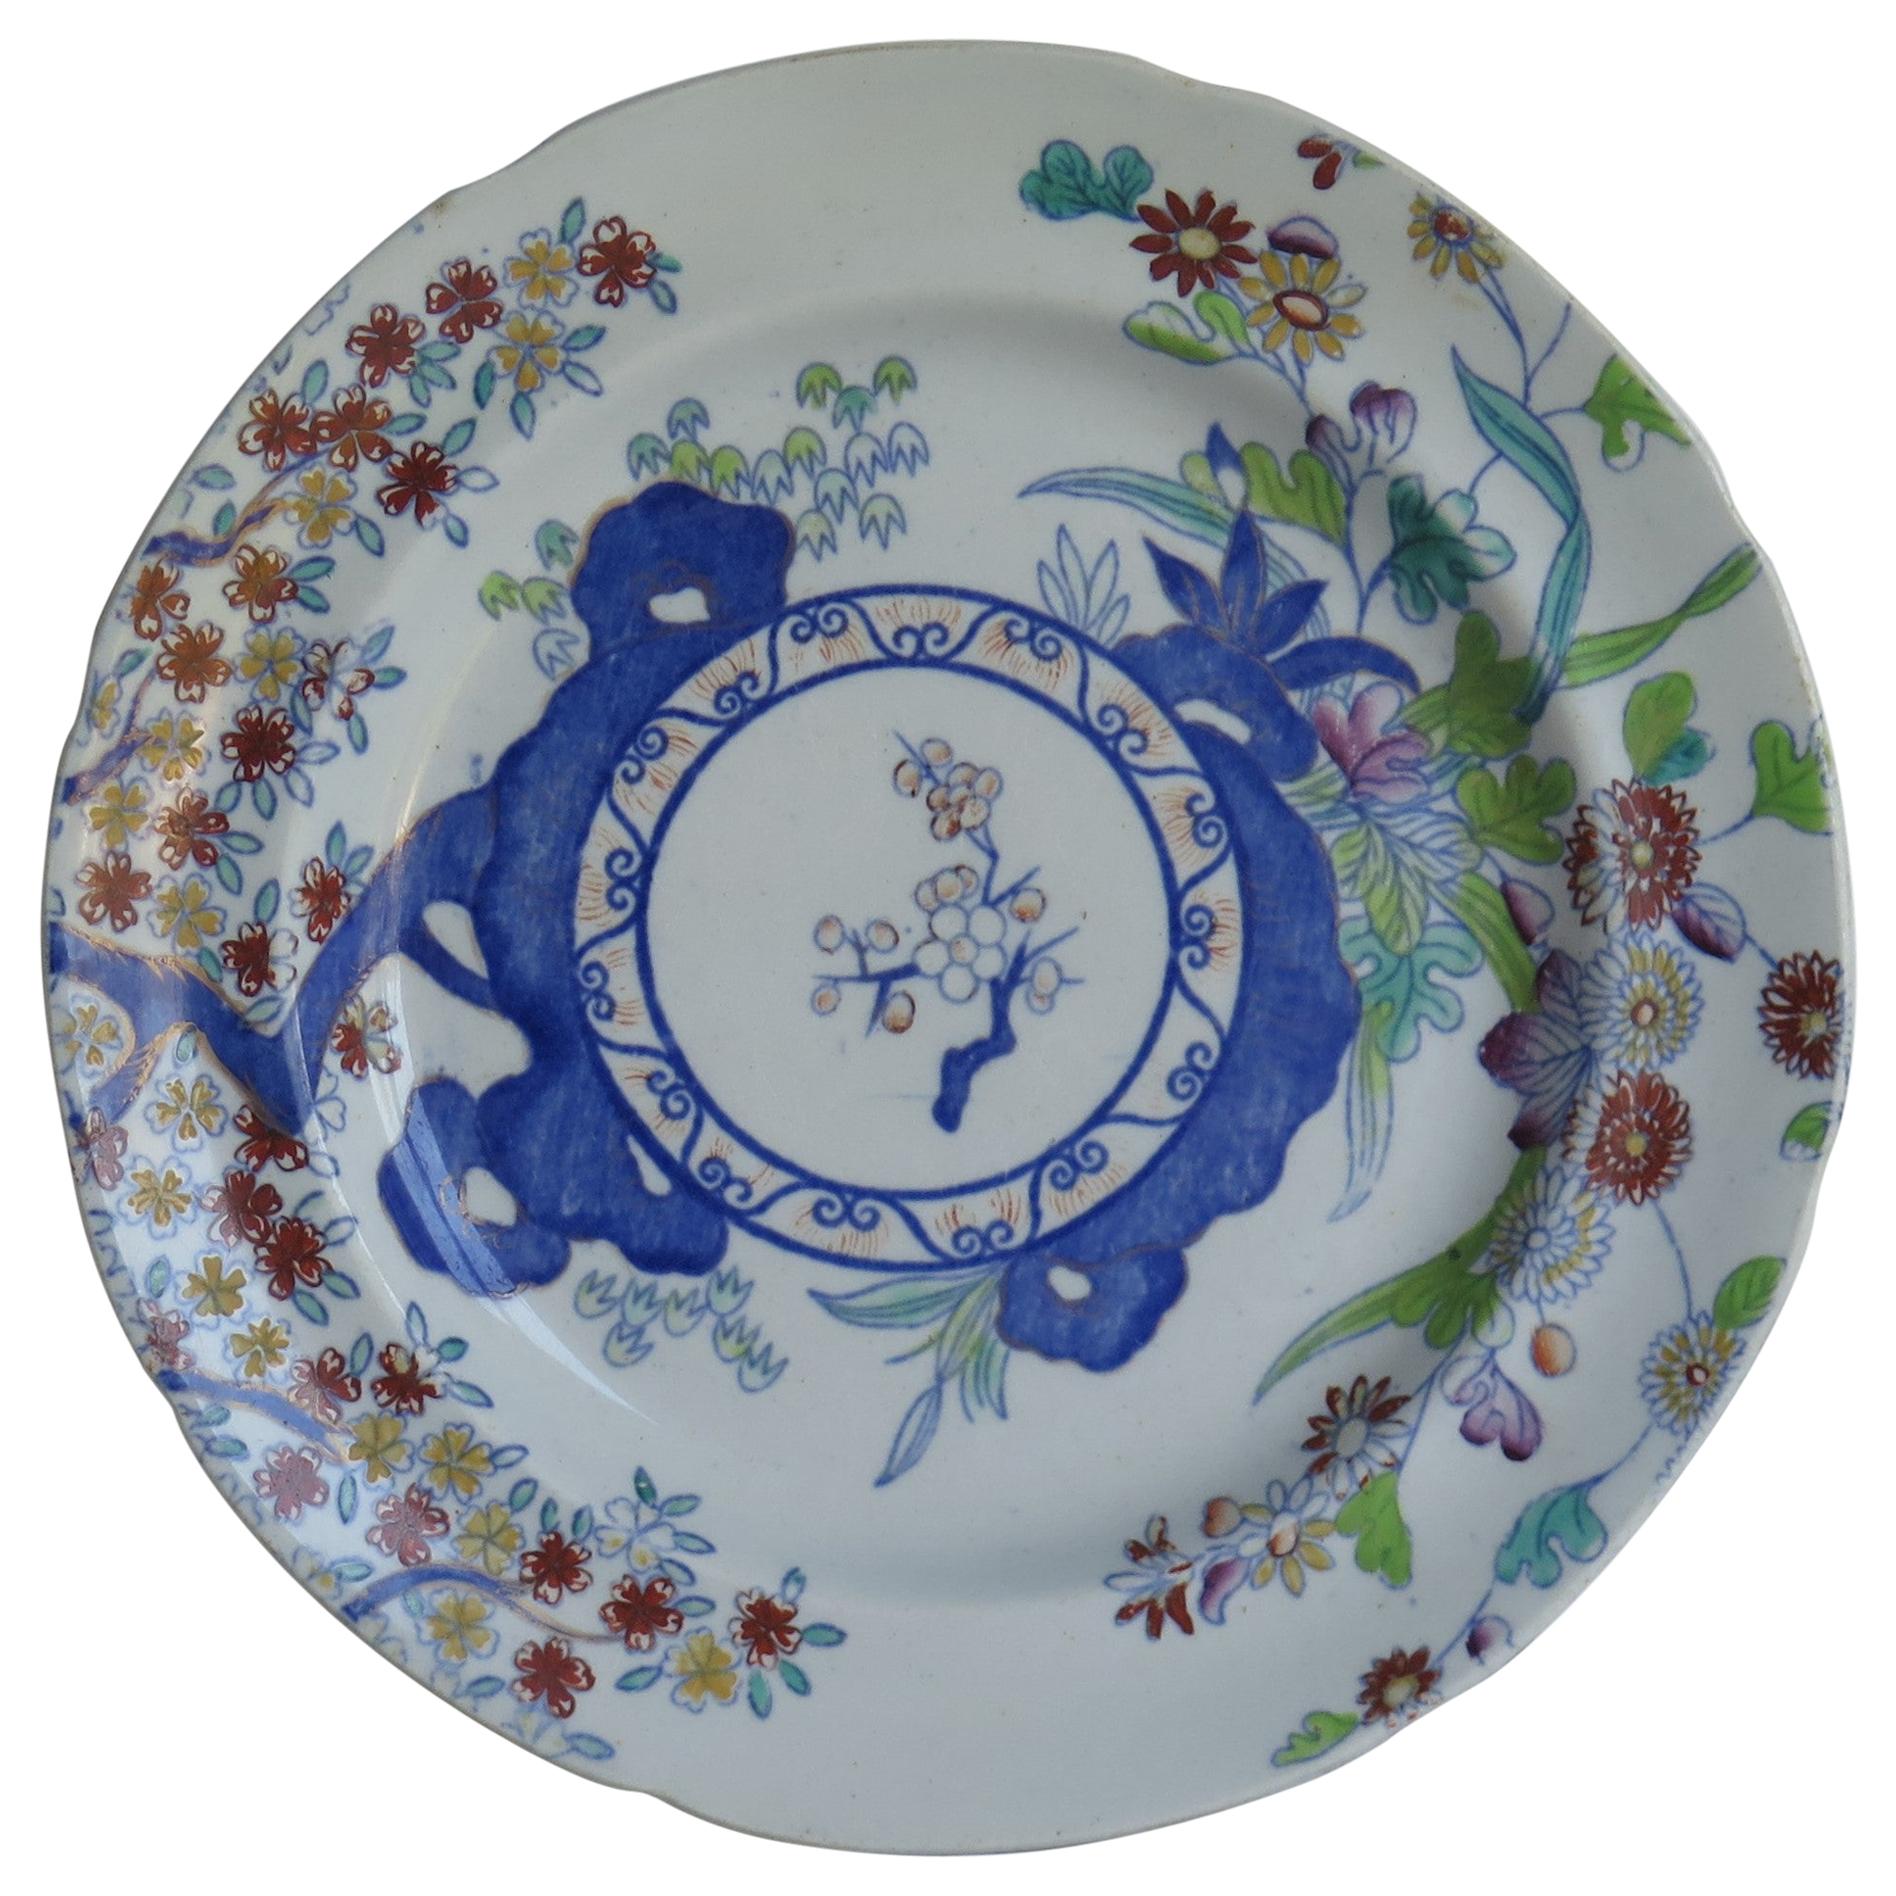 Plate by Copeland Late Spode in Japanese Kakiemon Pattern No. 2117, circa 1850 For Sale